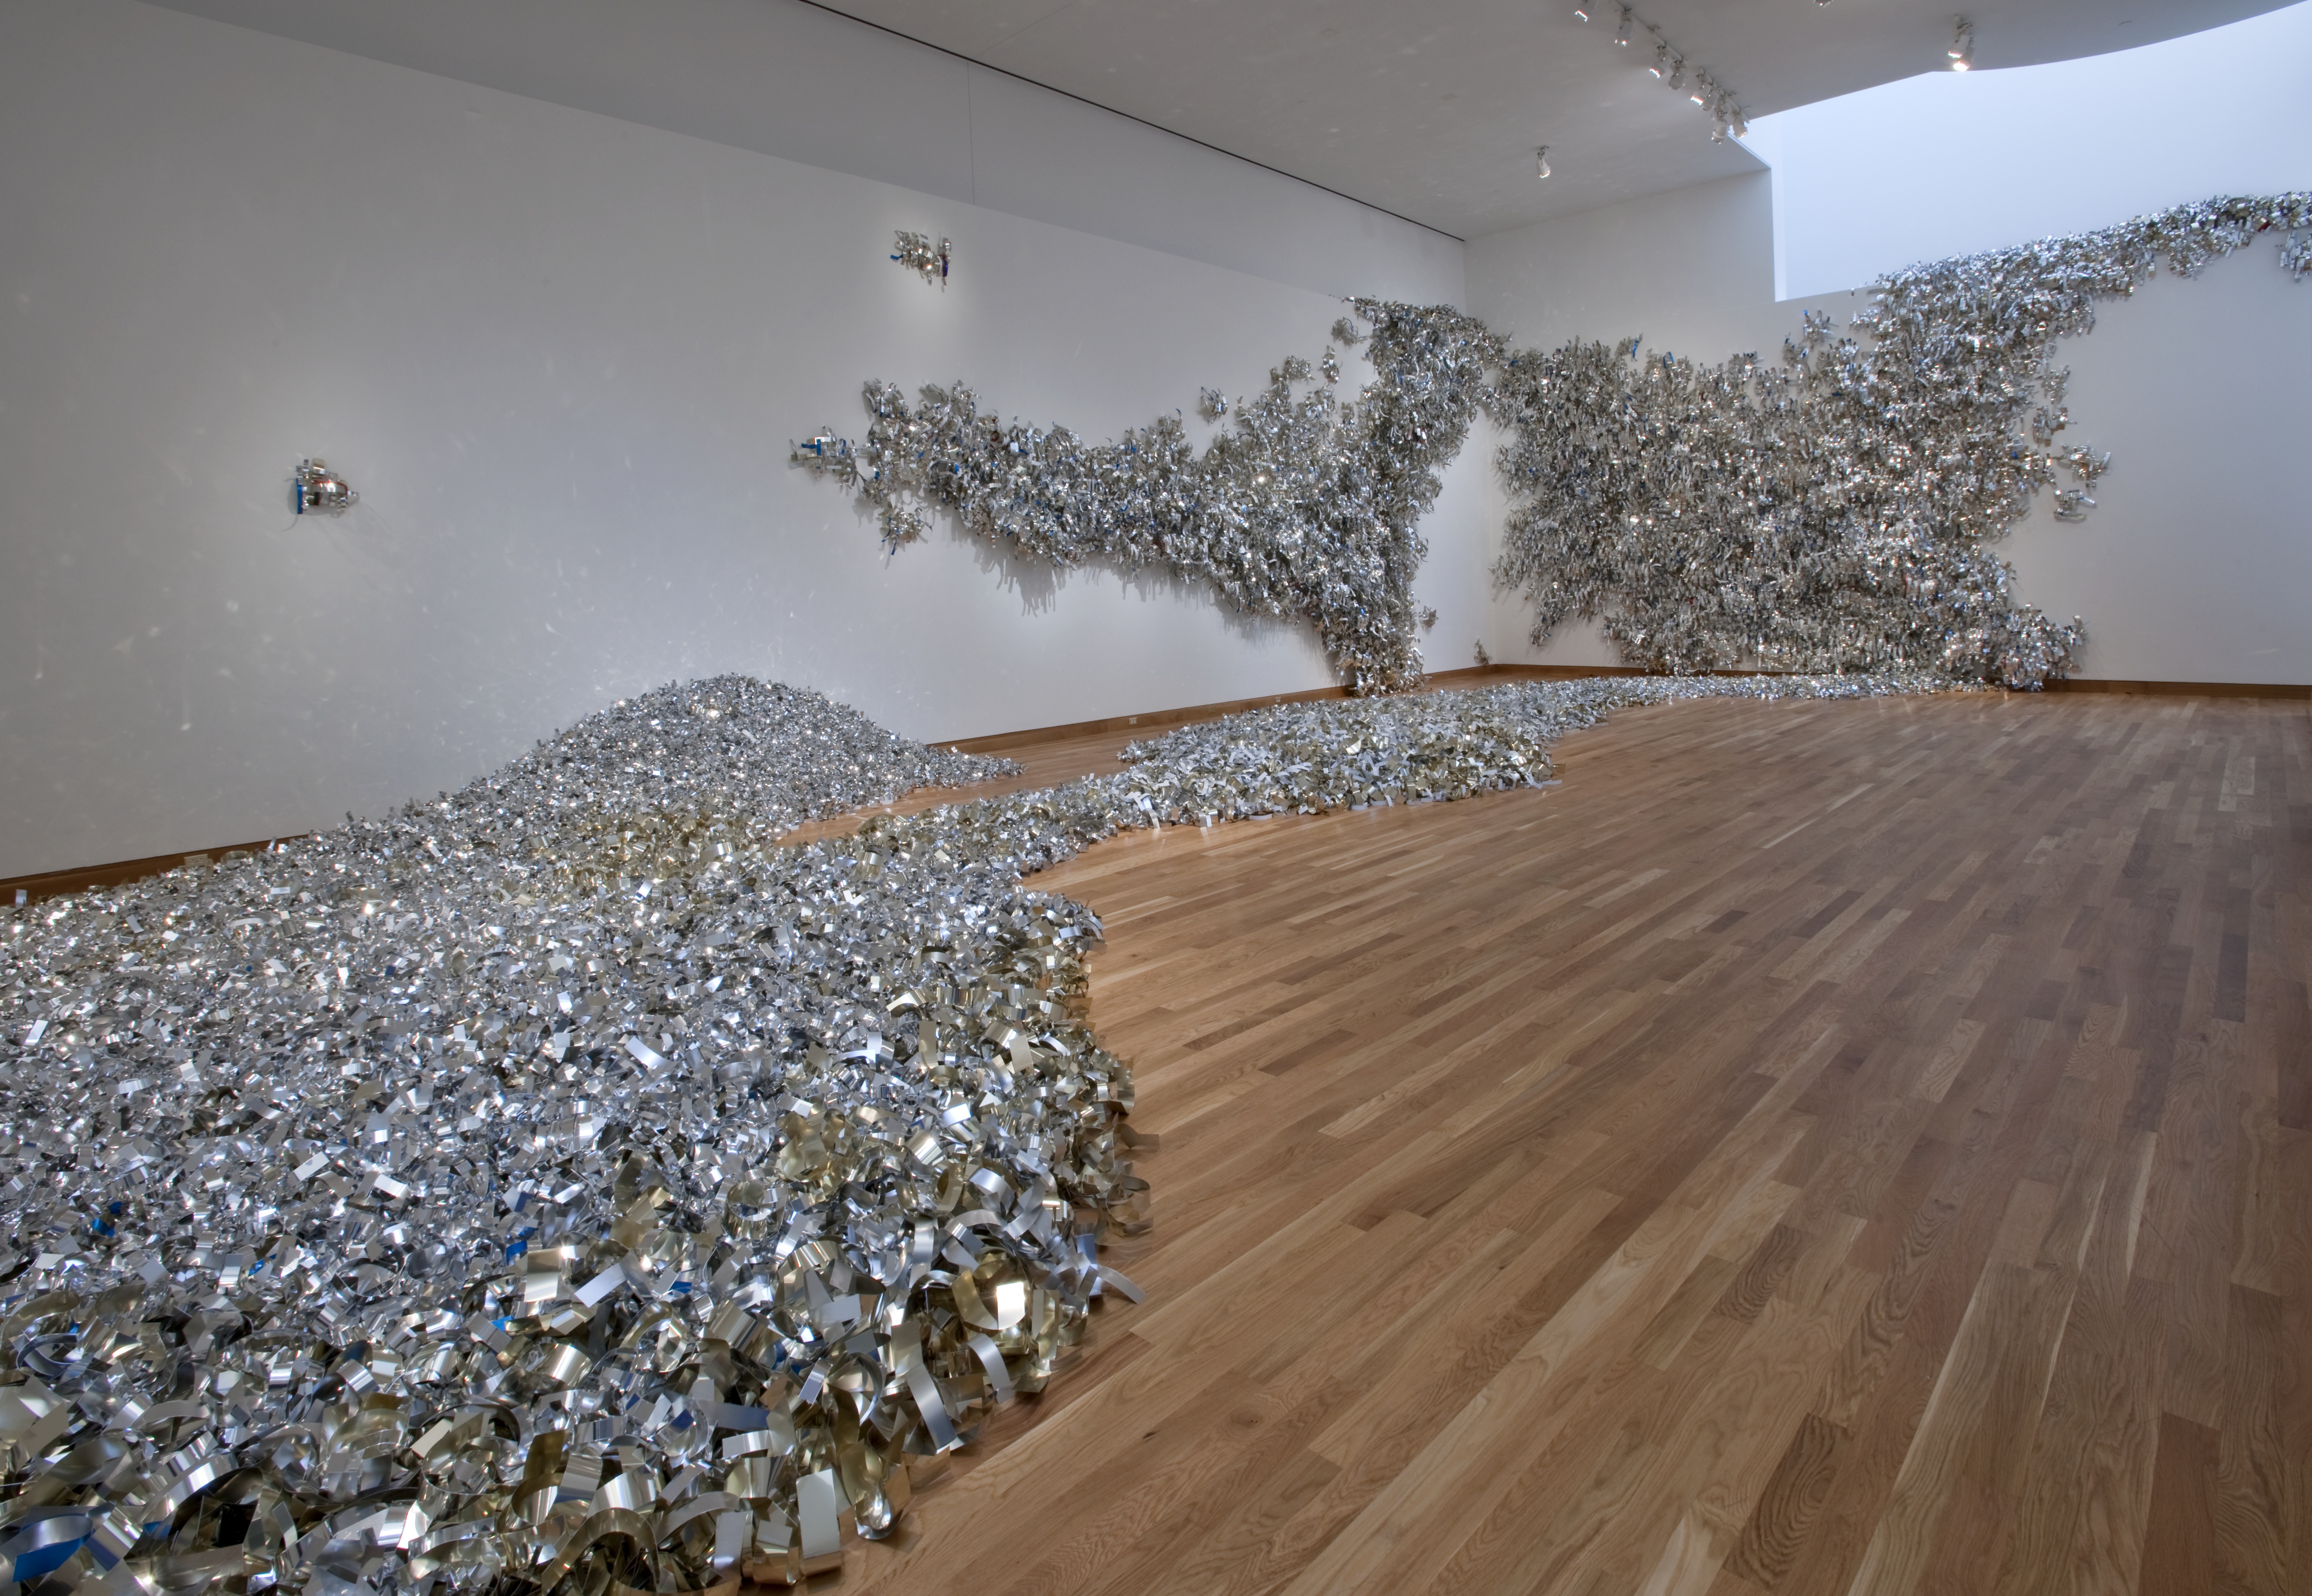 heaps of shiny material on the gallery floor and walls